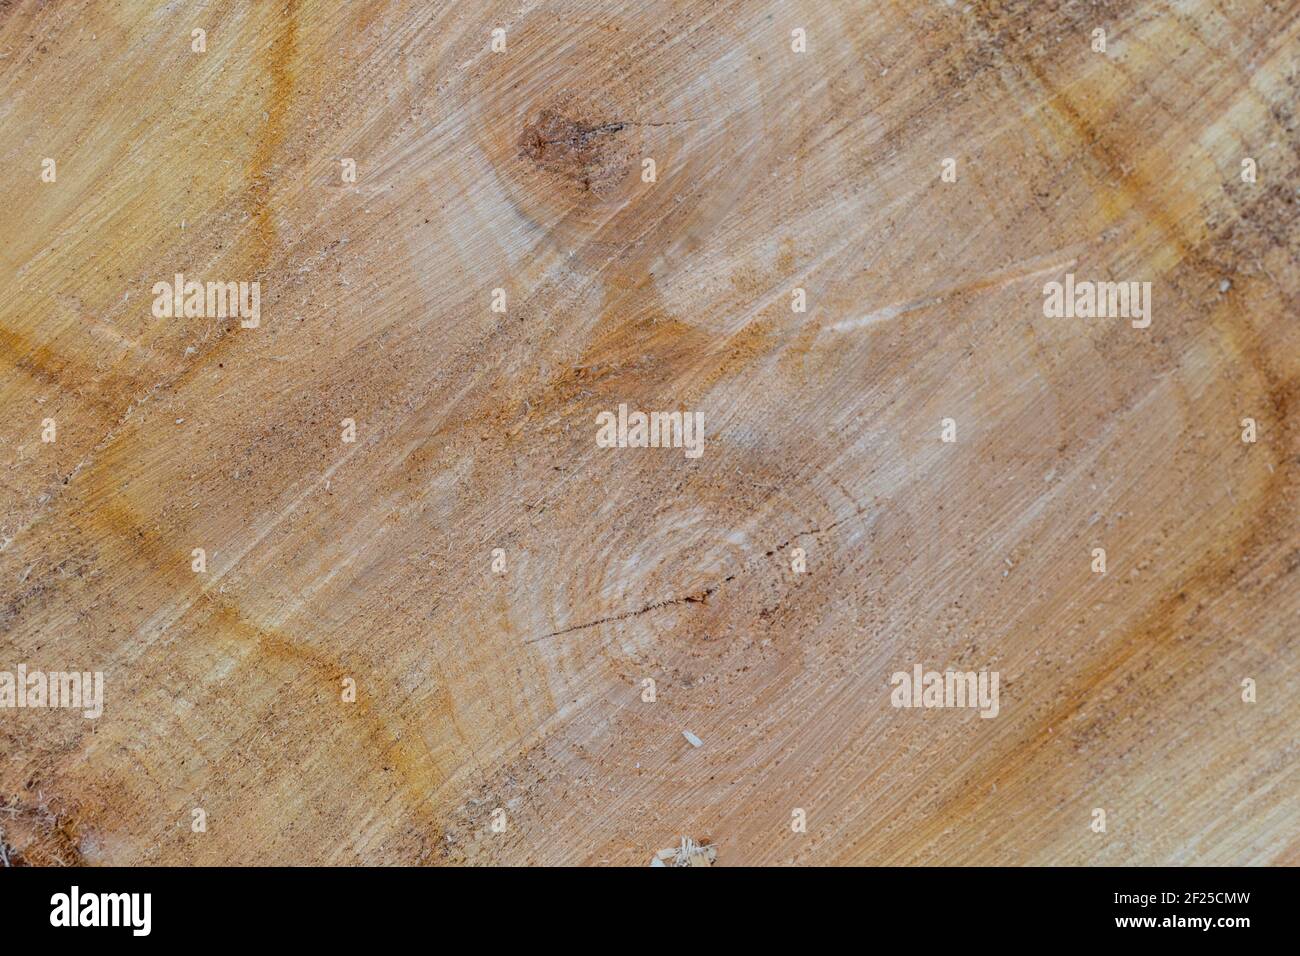 Abstract Rough Surface of Tree Rings Stock Photo